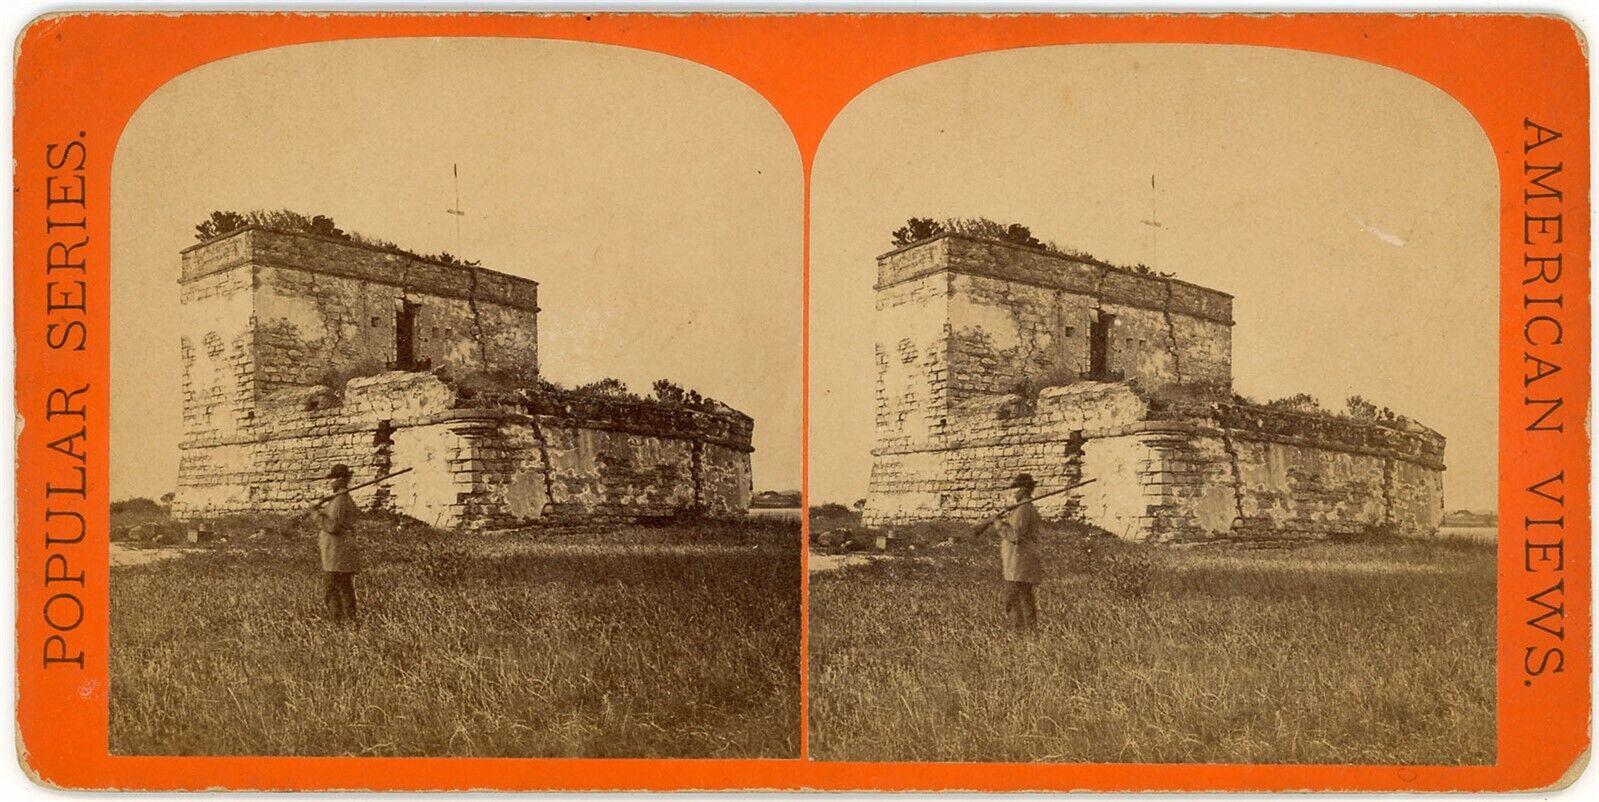 FLORIDA SV - Fort Matanzas - From the East - Anthony 1870s